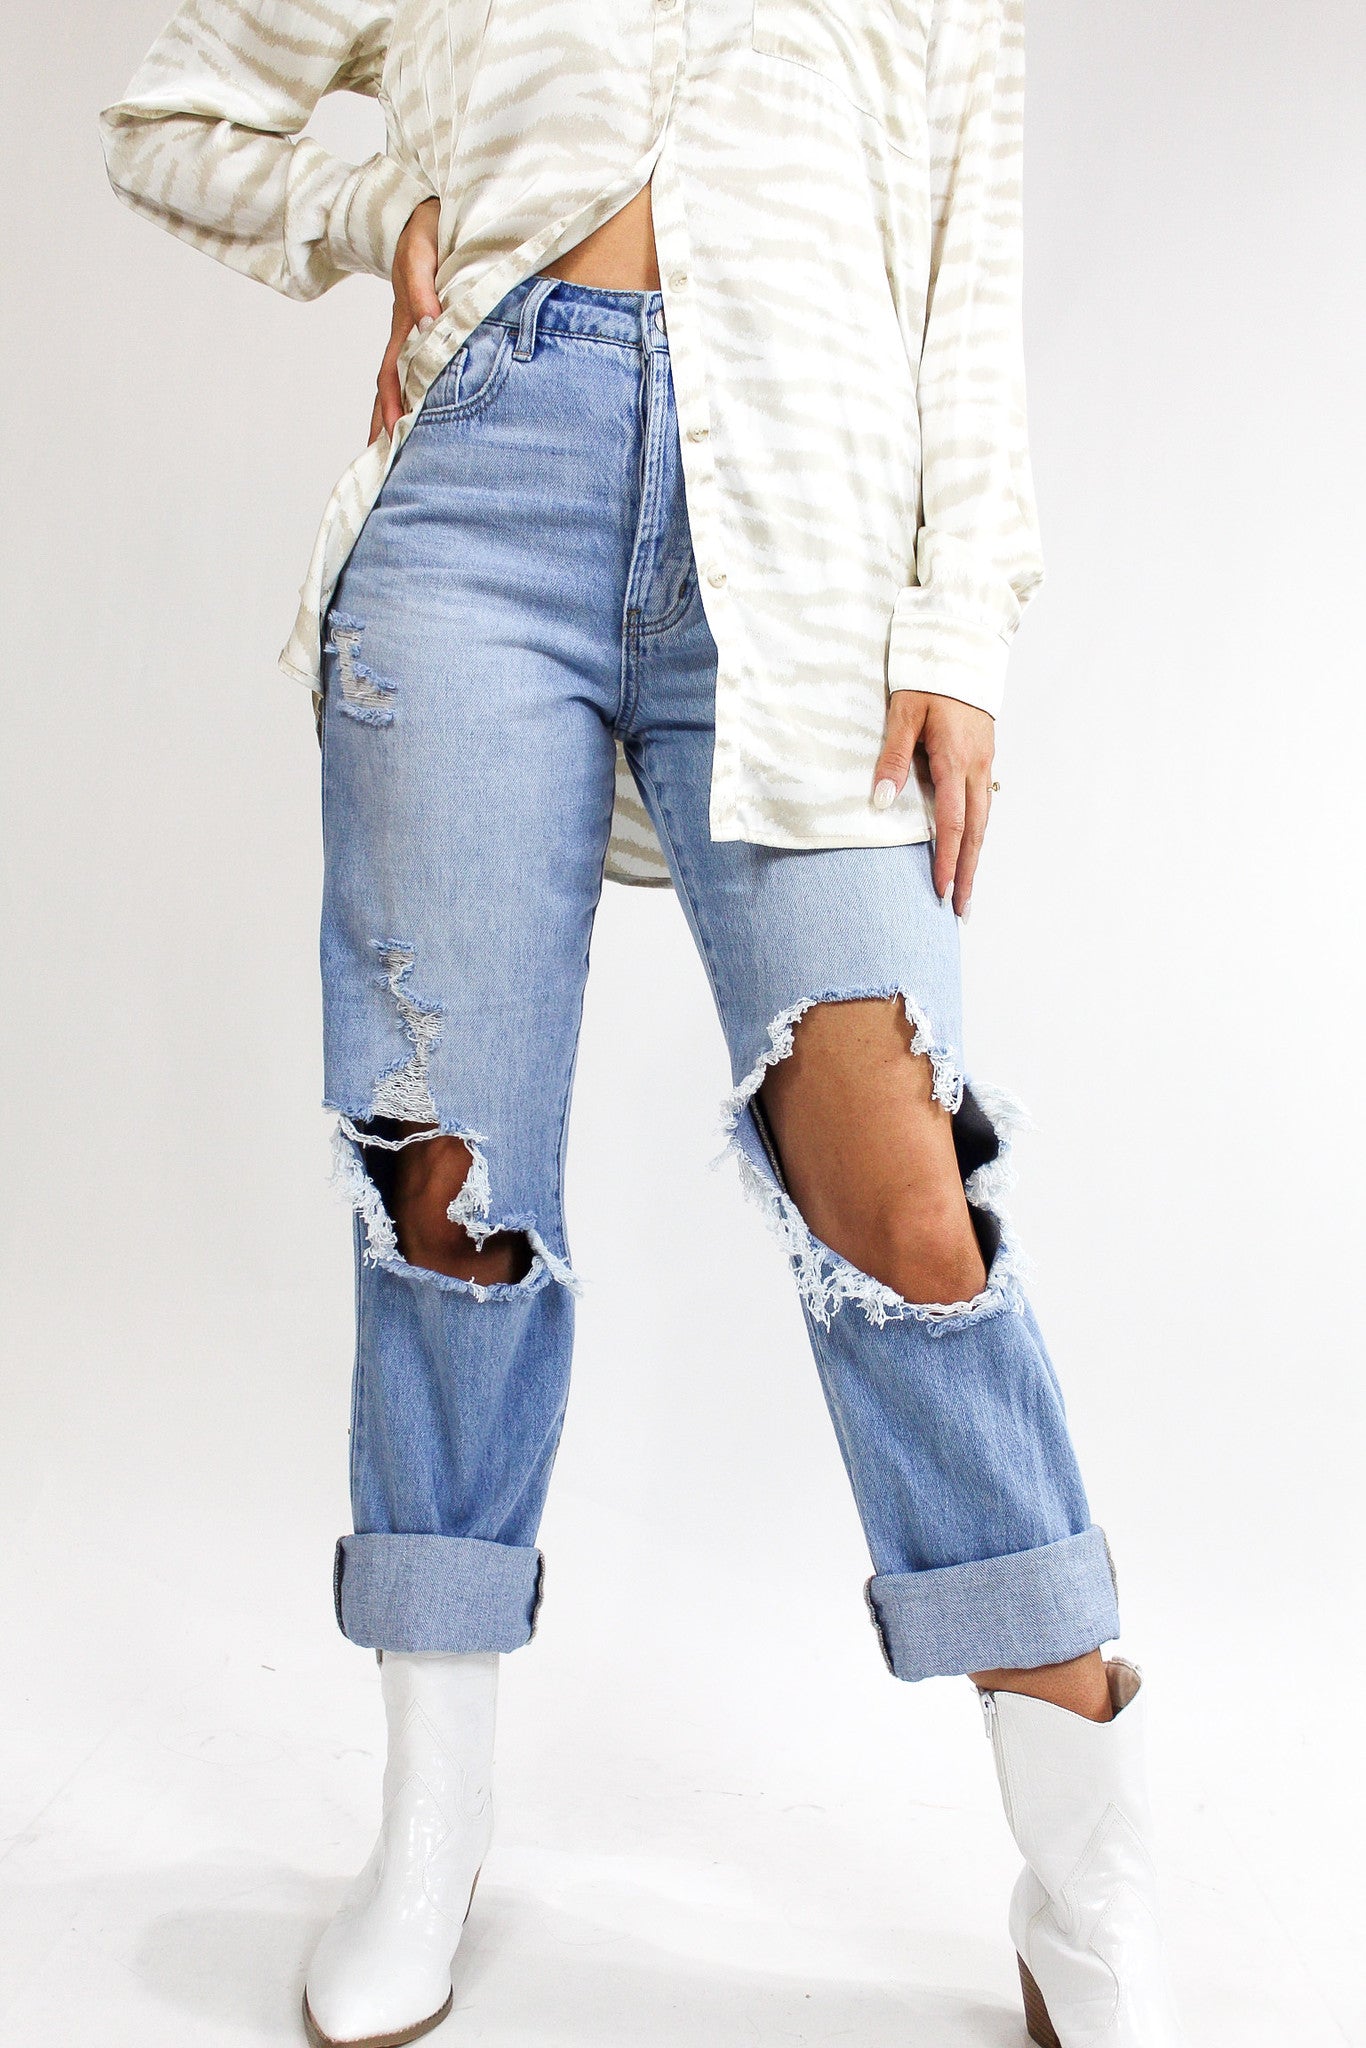 Melodrama Distressed Jeans